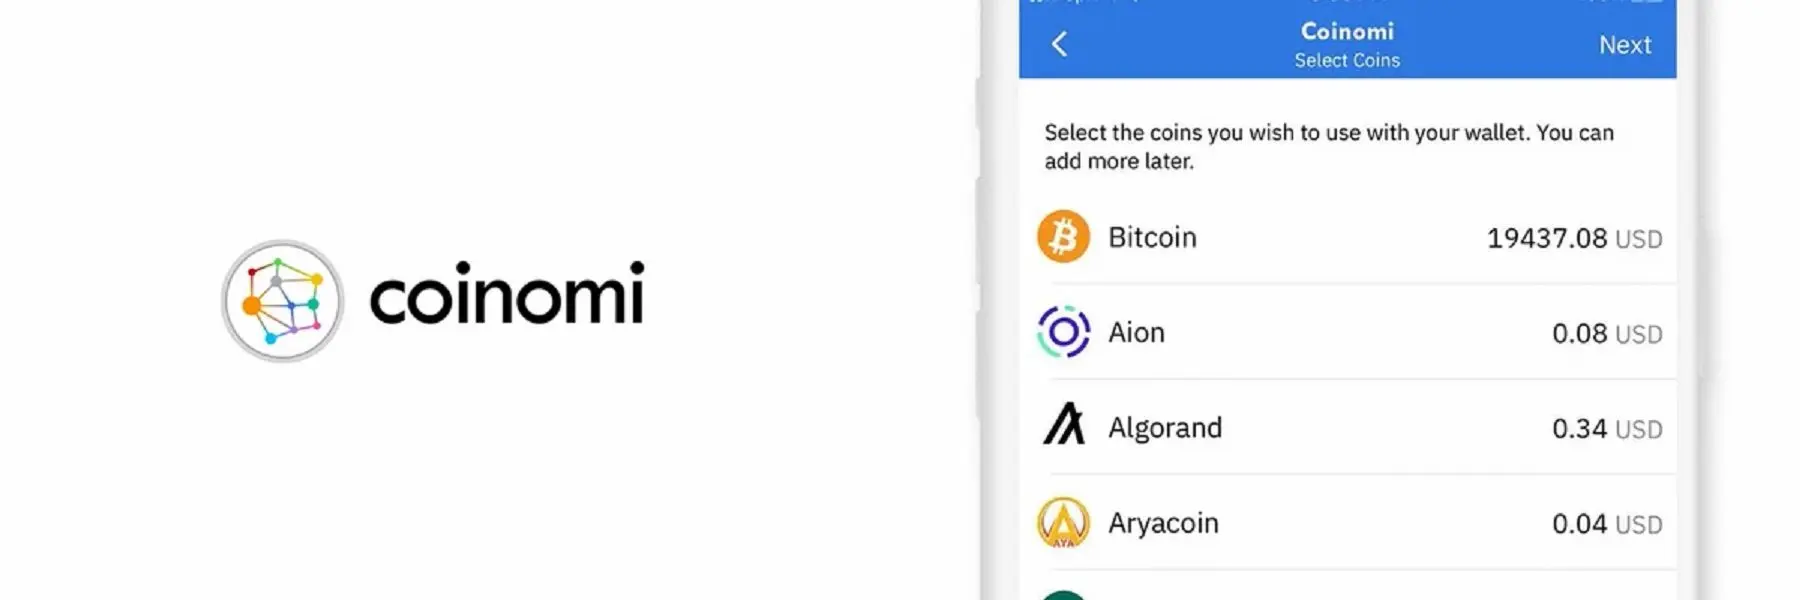 coinomi wallet and logo